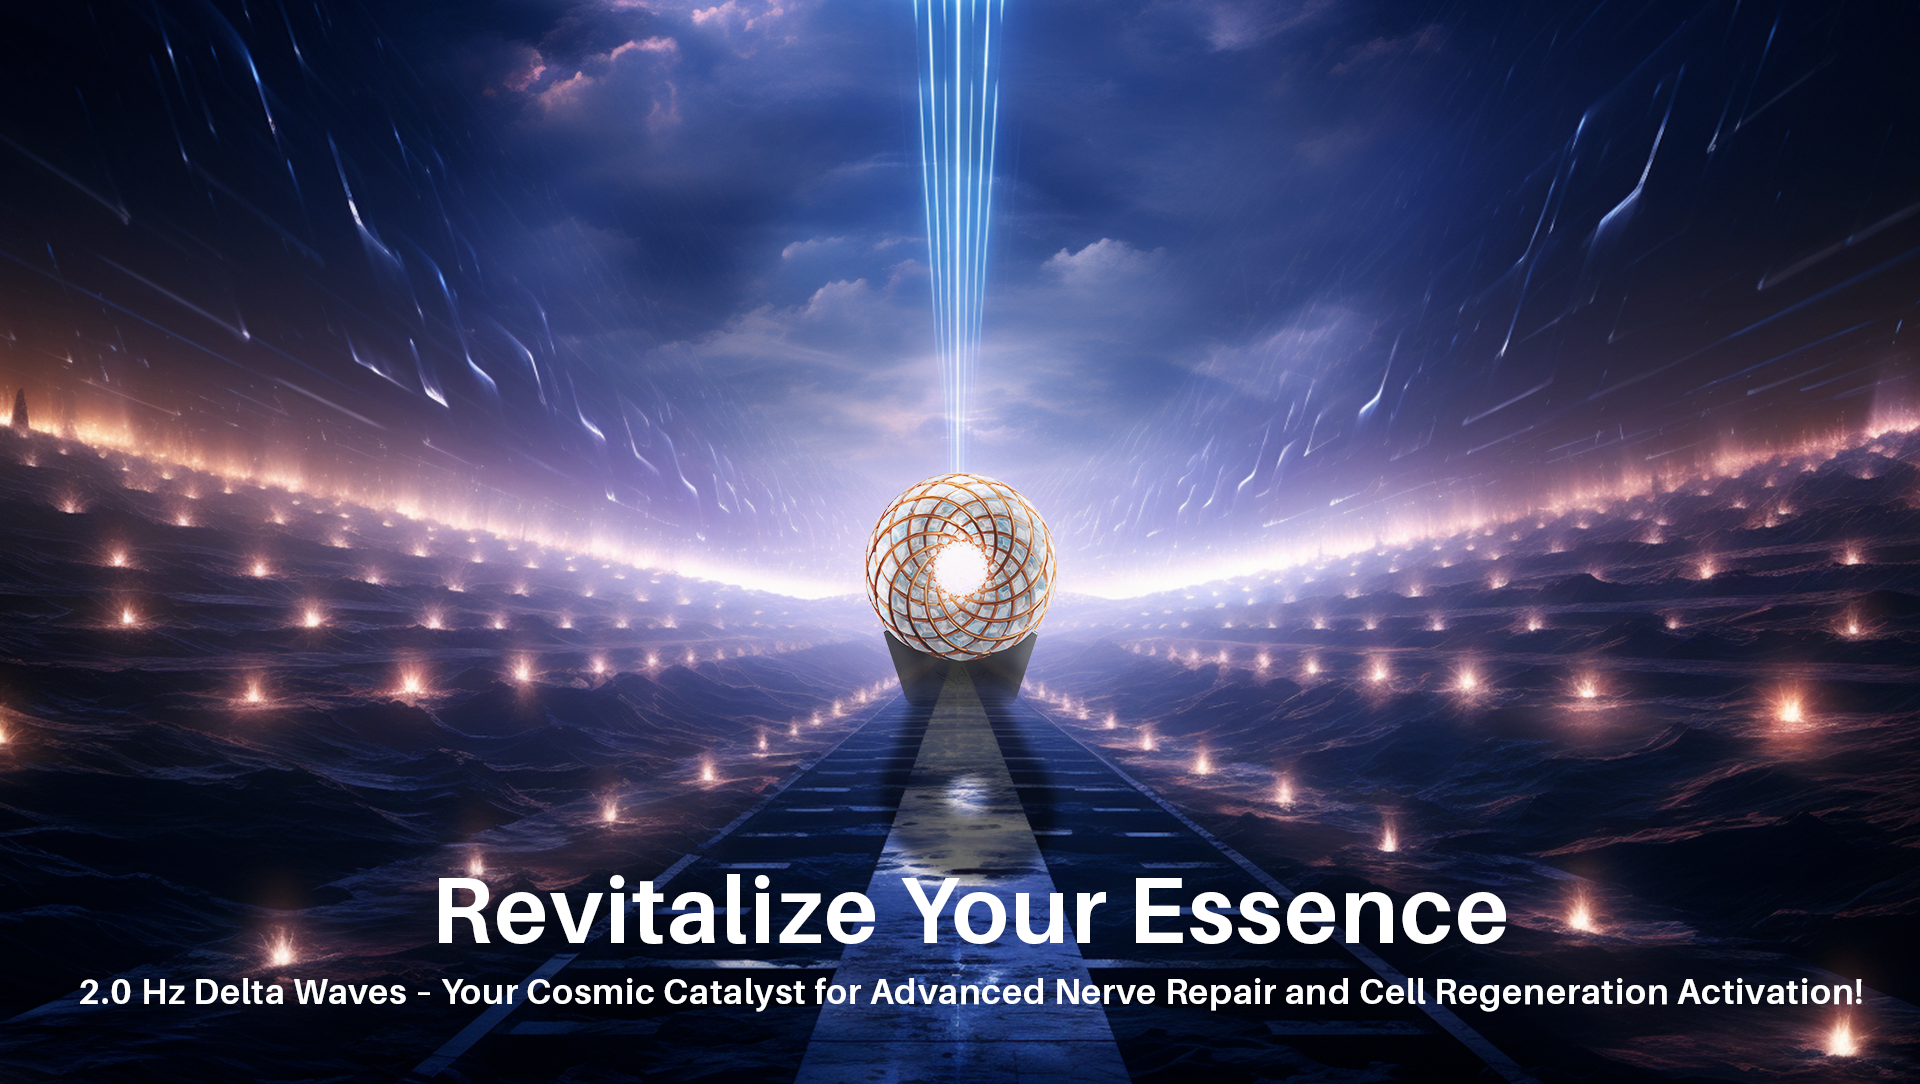 Revitalize Your Essence: 2.0 Hz Delta Waves – Your Cosmic Catalyst for Advanced Nerve Repair and Cell Regeneration Activation!